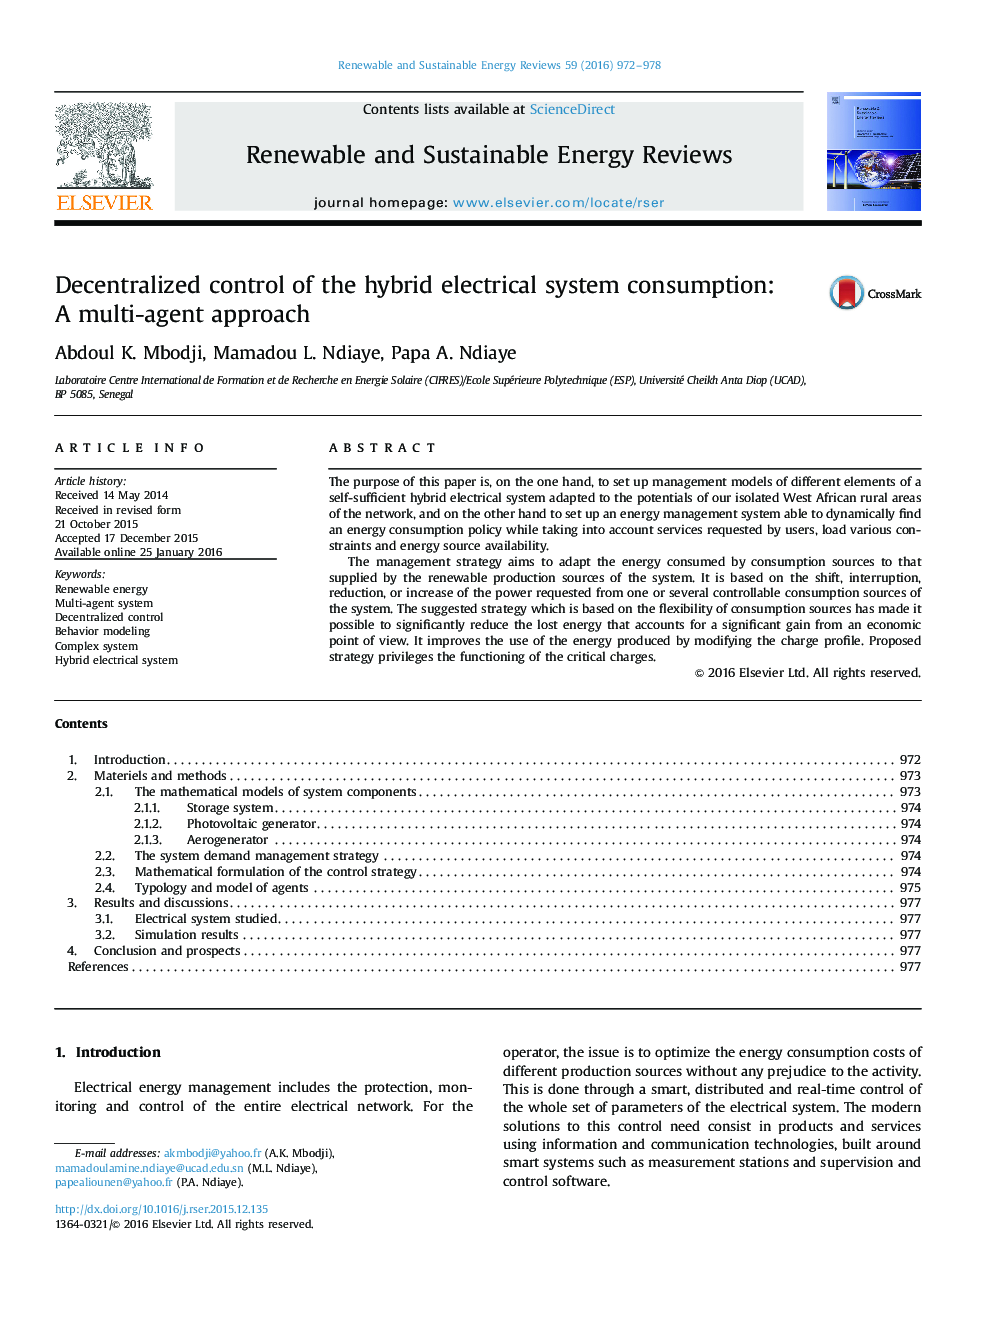 Decentralized control of the hybrid electrical system consumption: A multi-agent approach